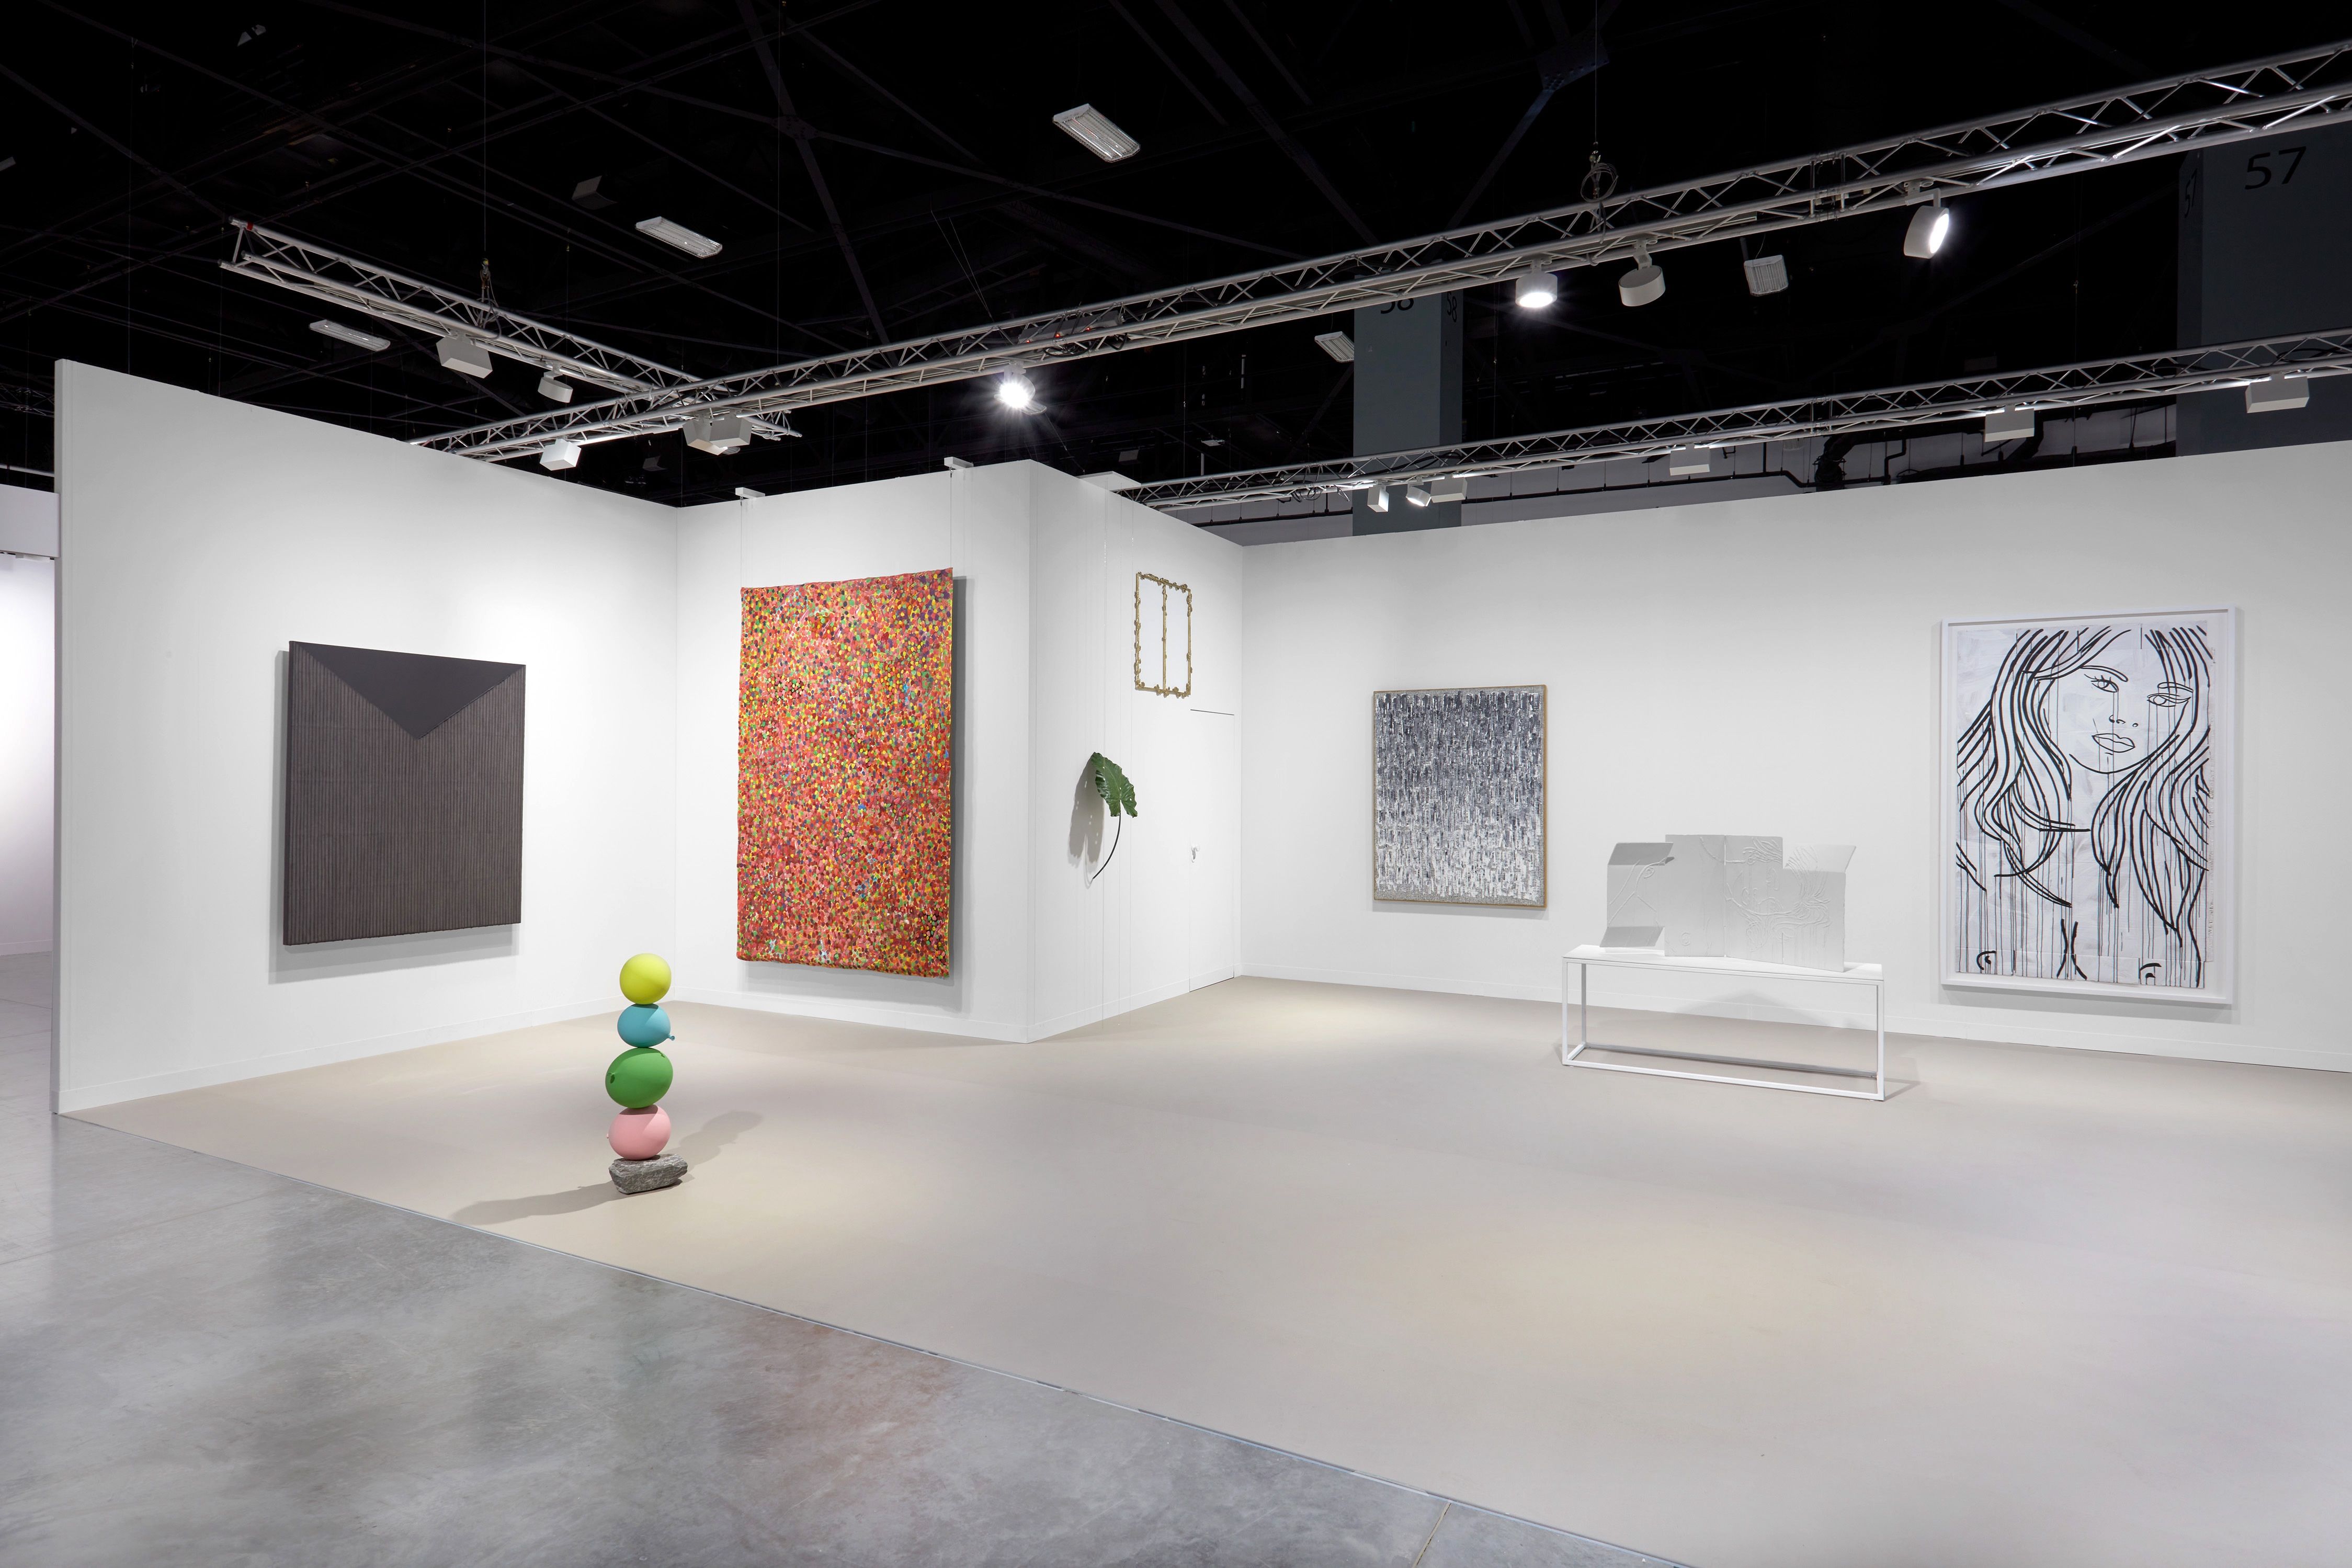 LVMH Brands - Art Basel 2022 - CourMed - Concierge Health and Wellness